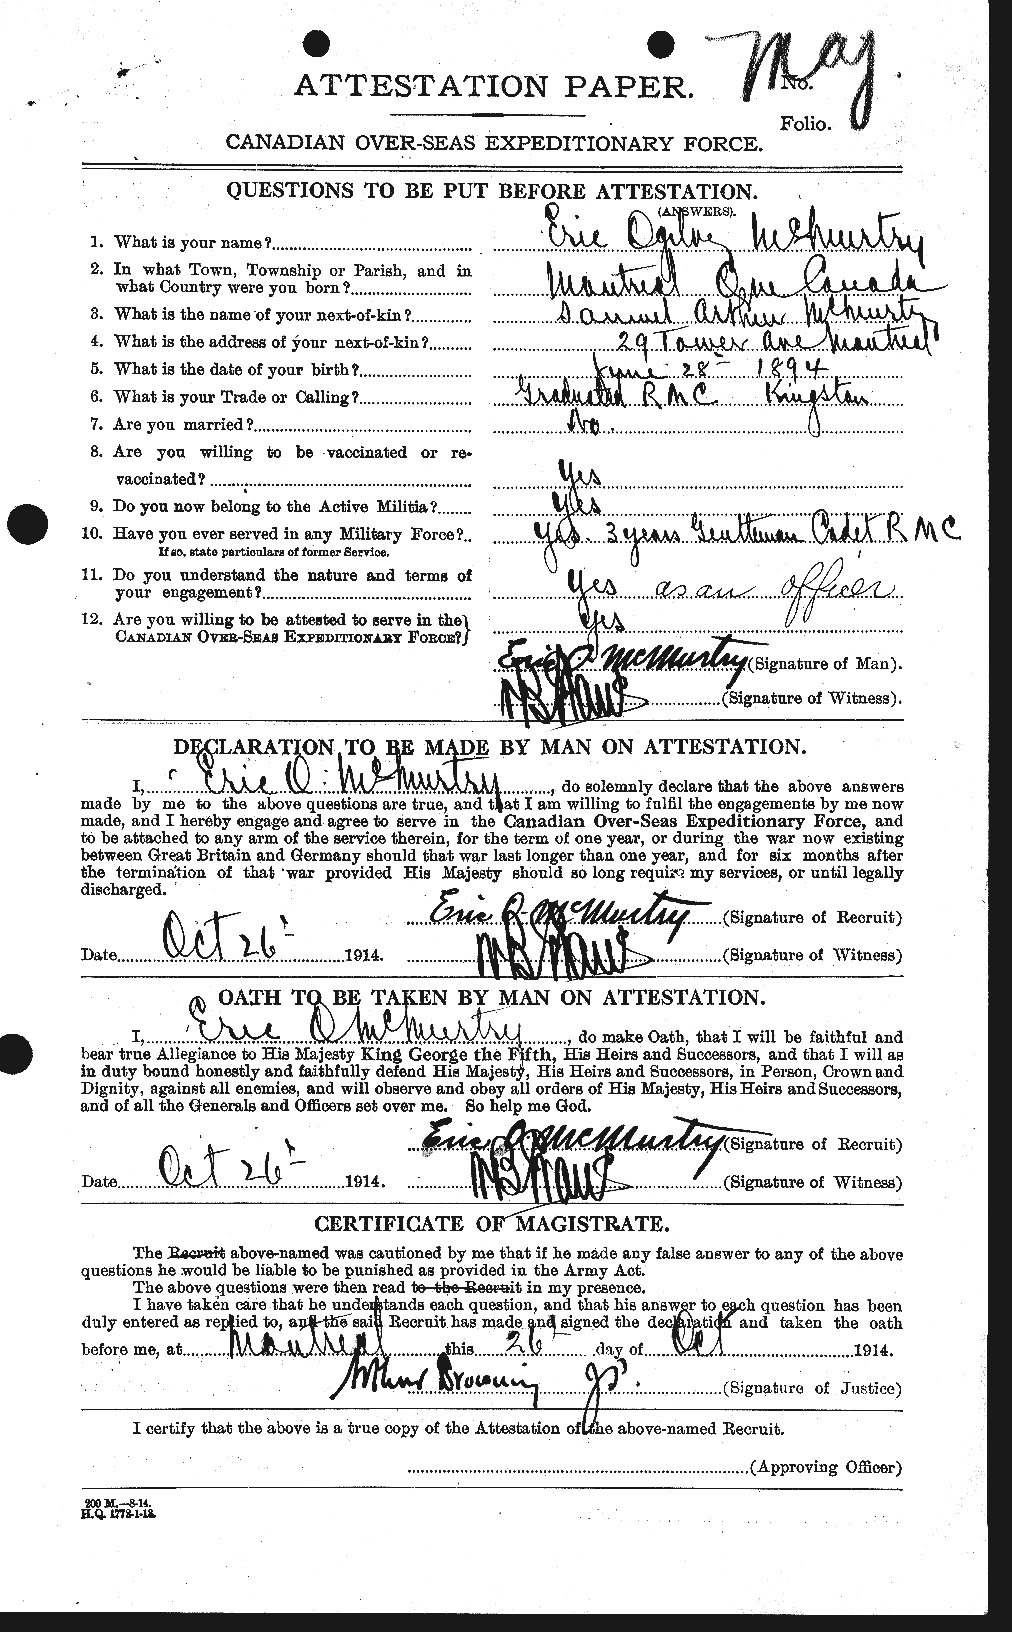 Personnel Records of the First World War - CEF 539492a